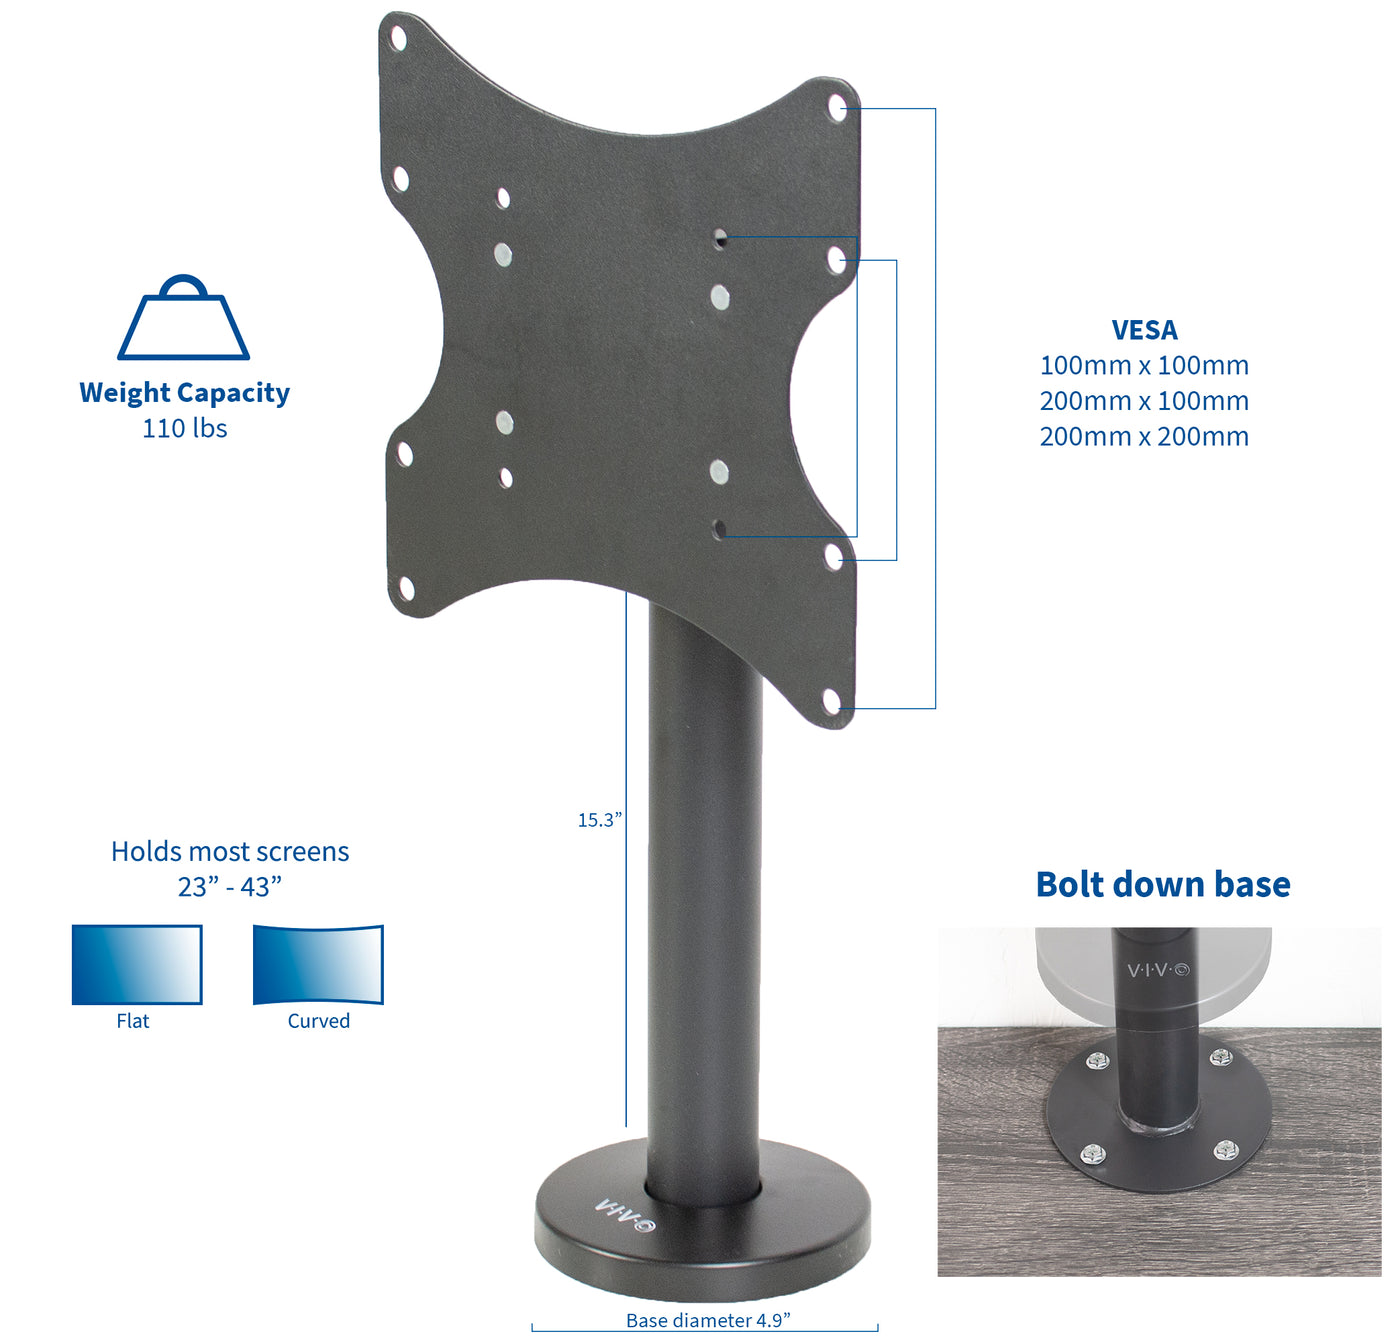 Low profile bolt-down TV mount for a minimalistic look with maximum support and elevation.